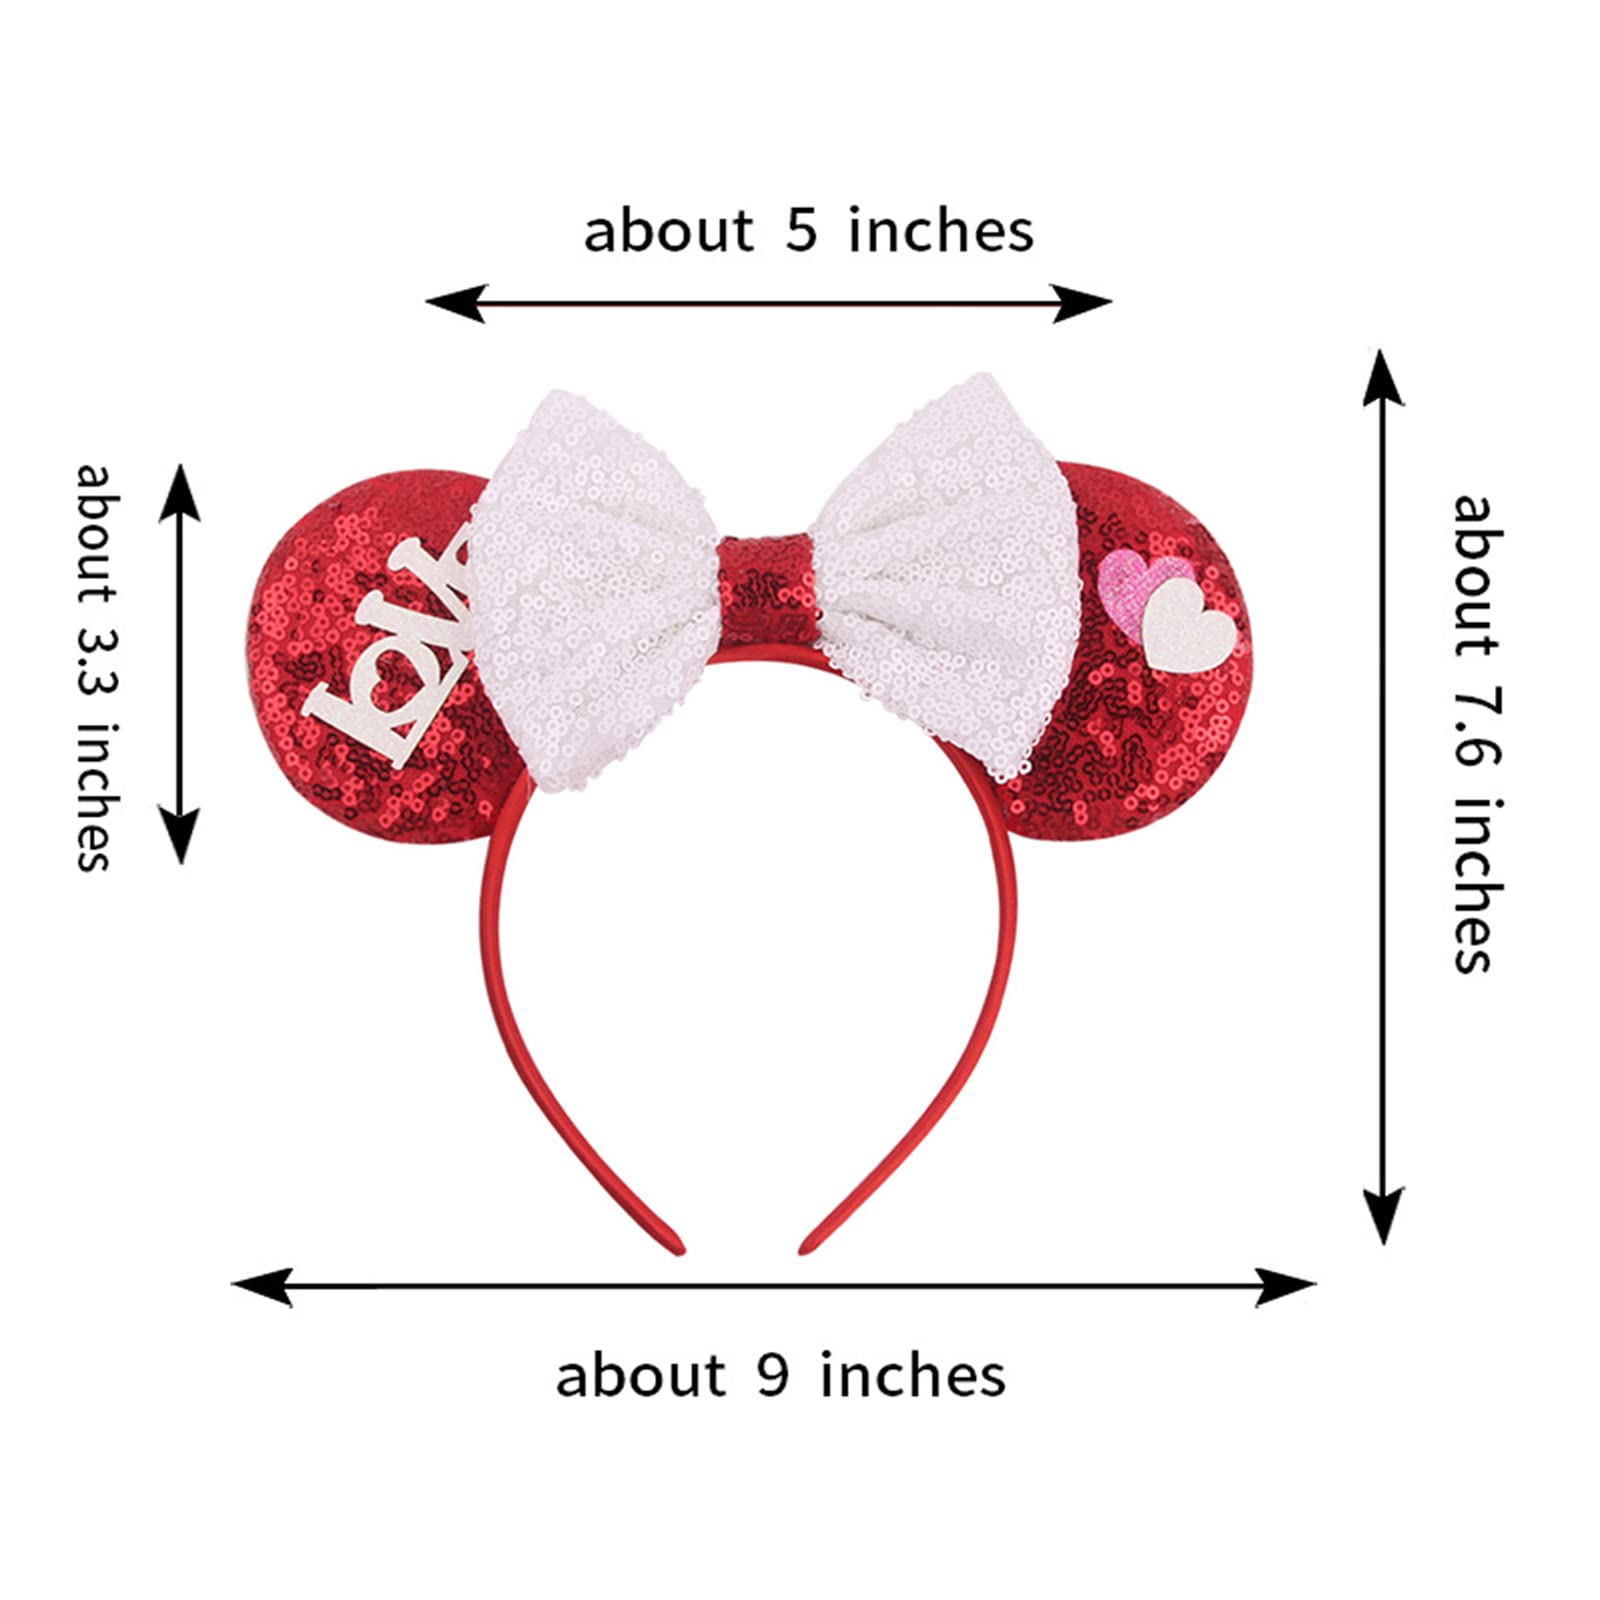 QHSWDLP Mouse Ears Headbands Shiny Bows Minnie Ear Hair Band Princess Decoration Cosplay Costume Accessory for Women Girls